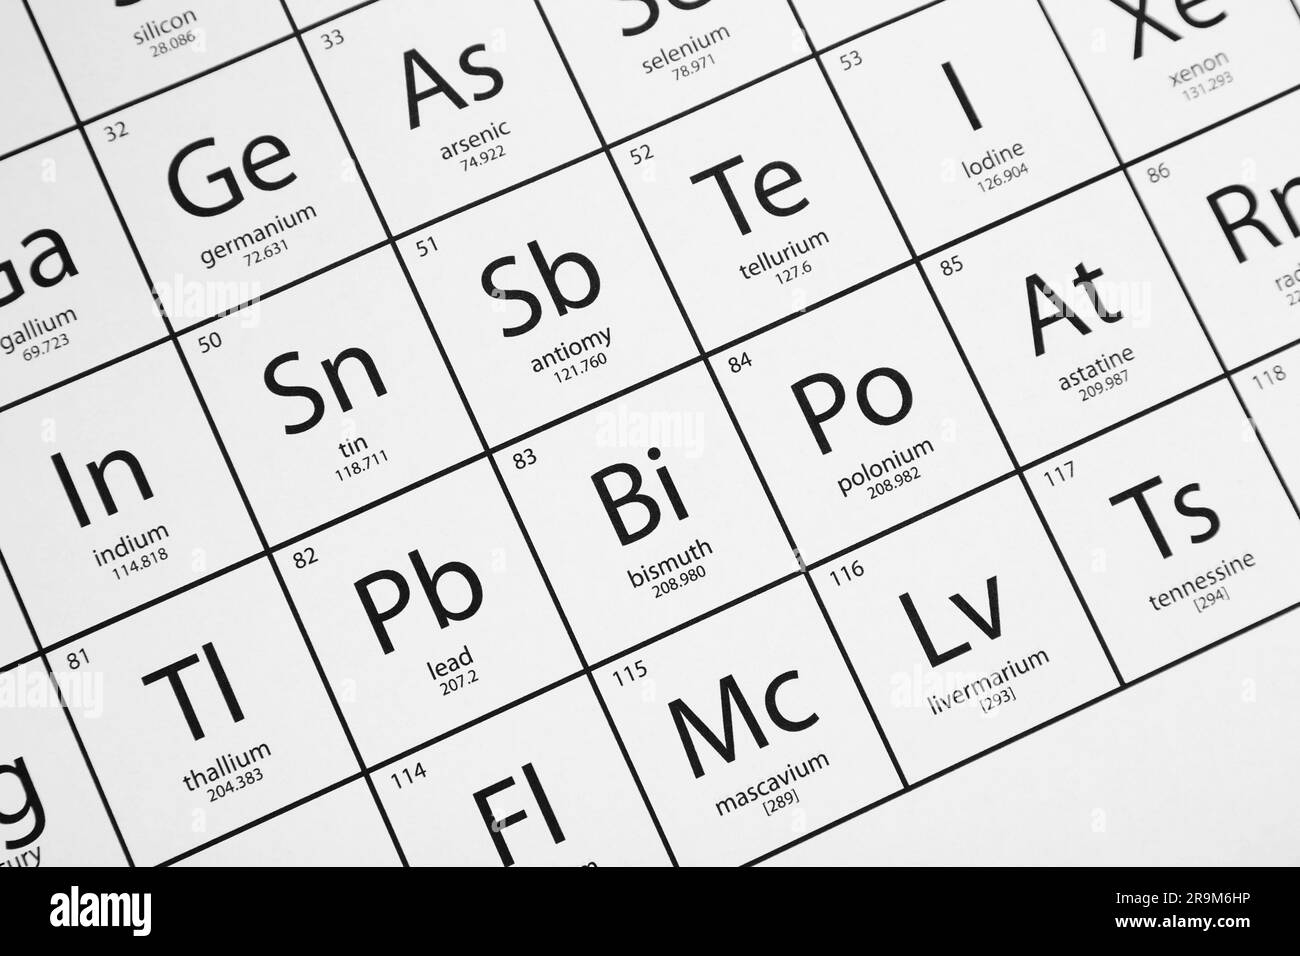 Periodic table of chemical elements, top view Stock Photo